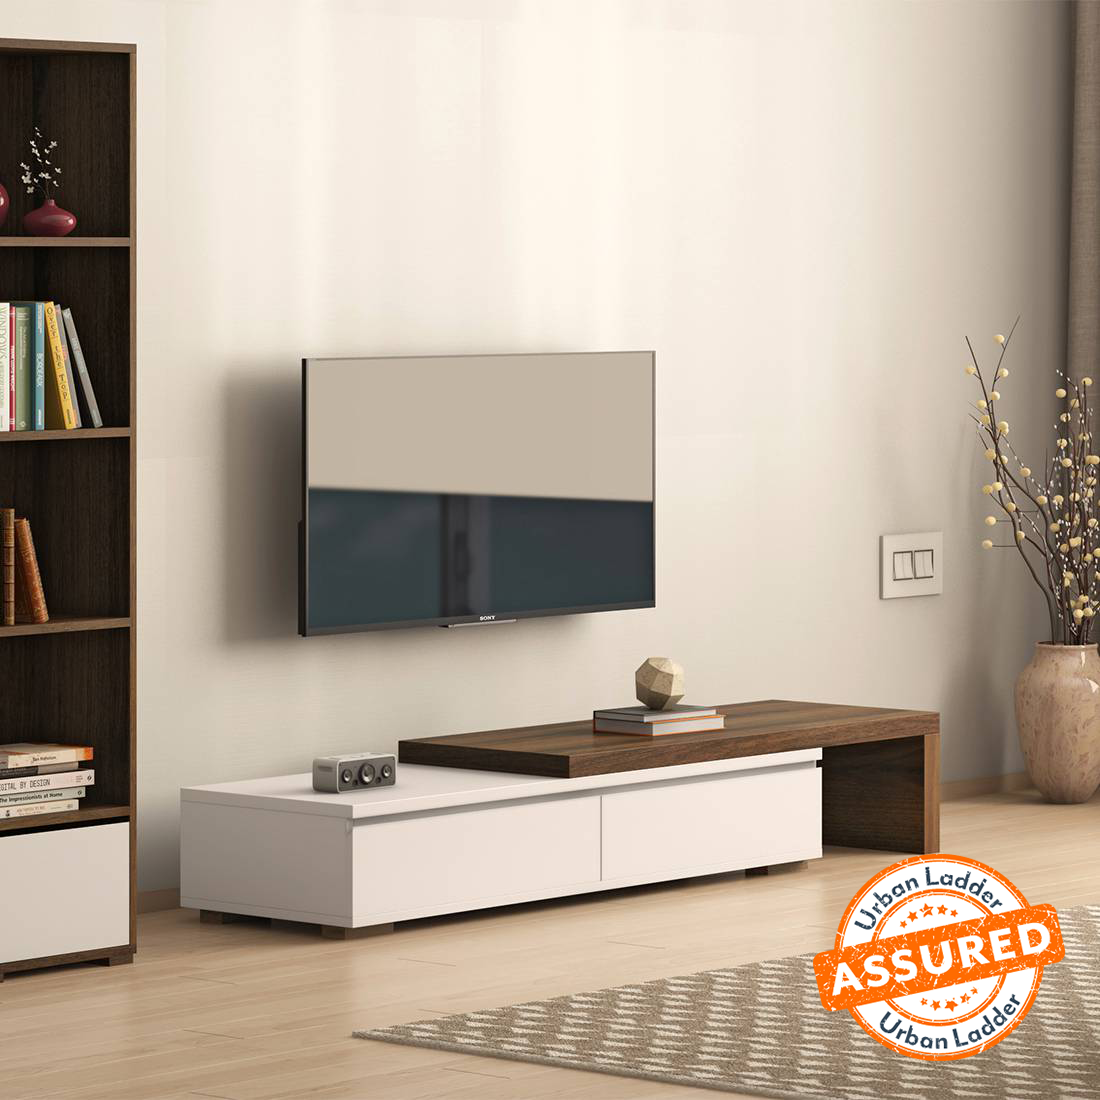 Up to 70% off on 200+ TV Unit Designs | Full House Sale - Urban Ladder